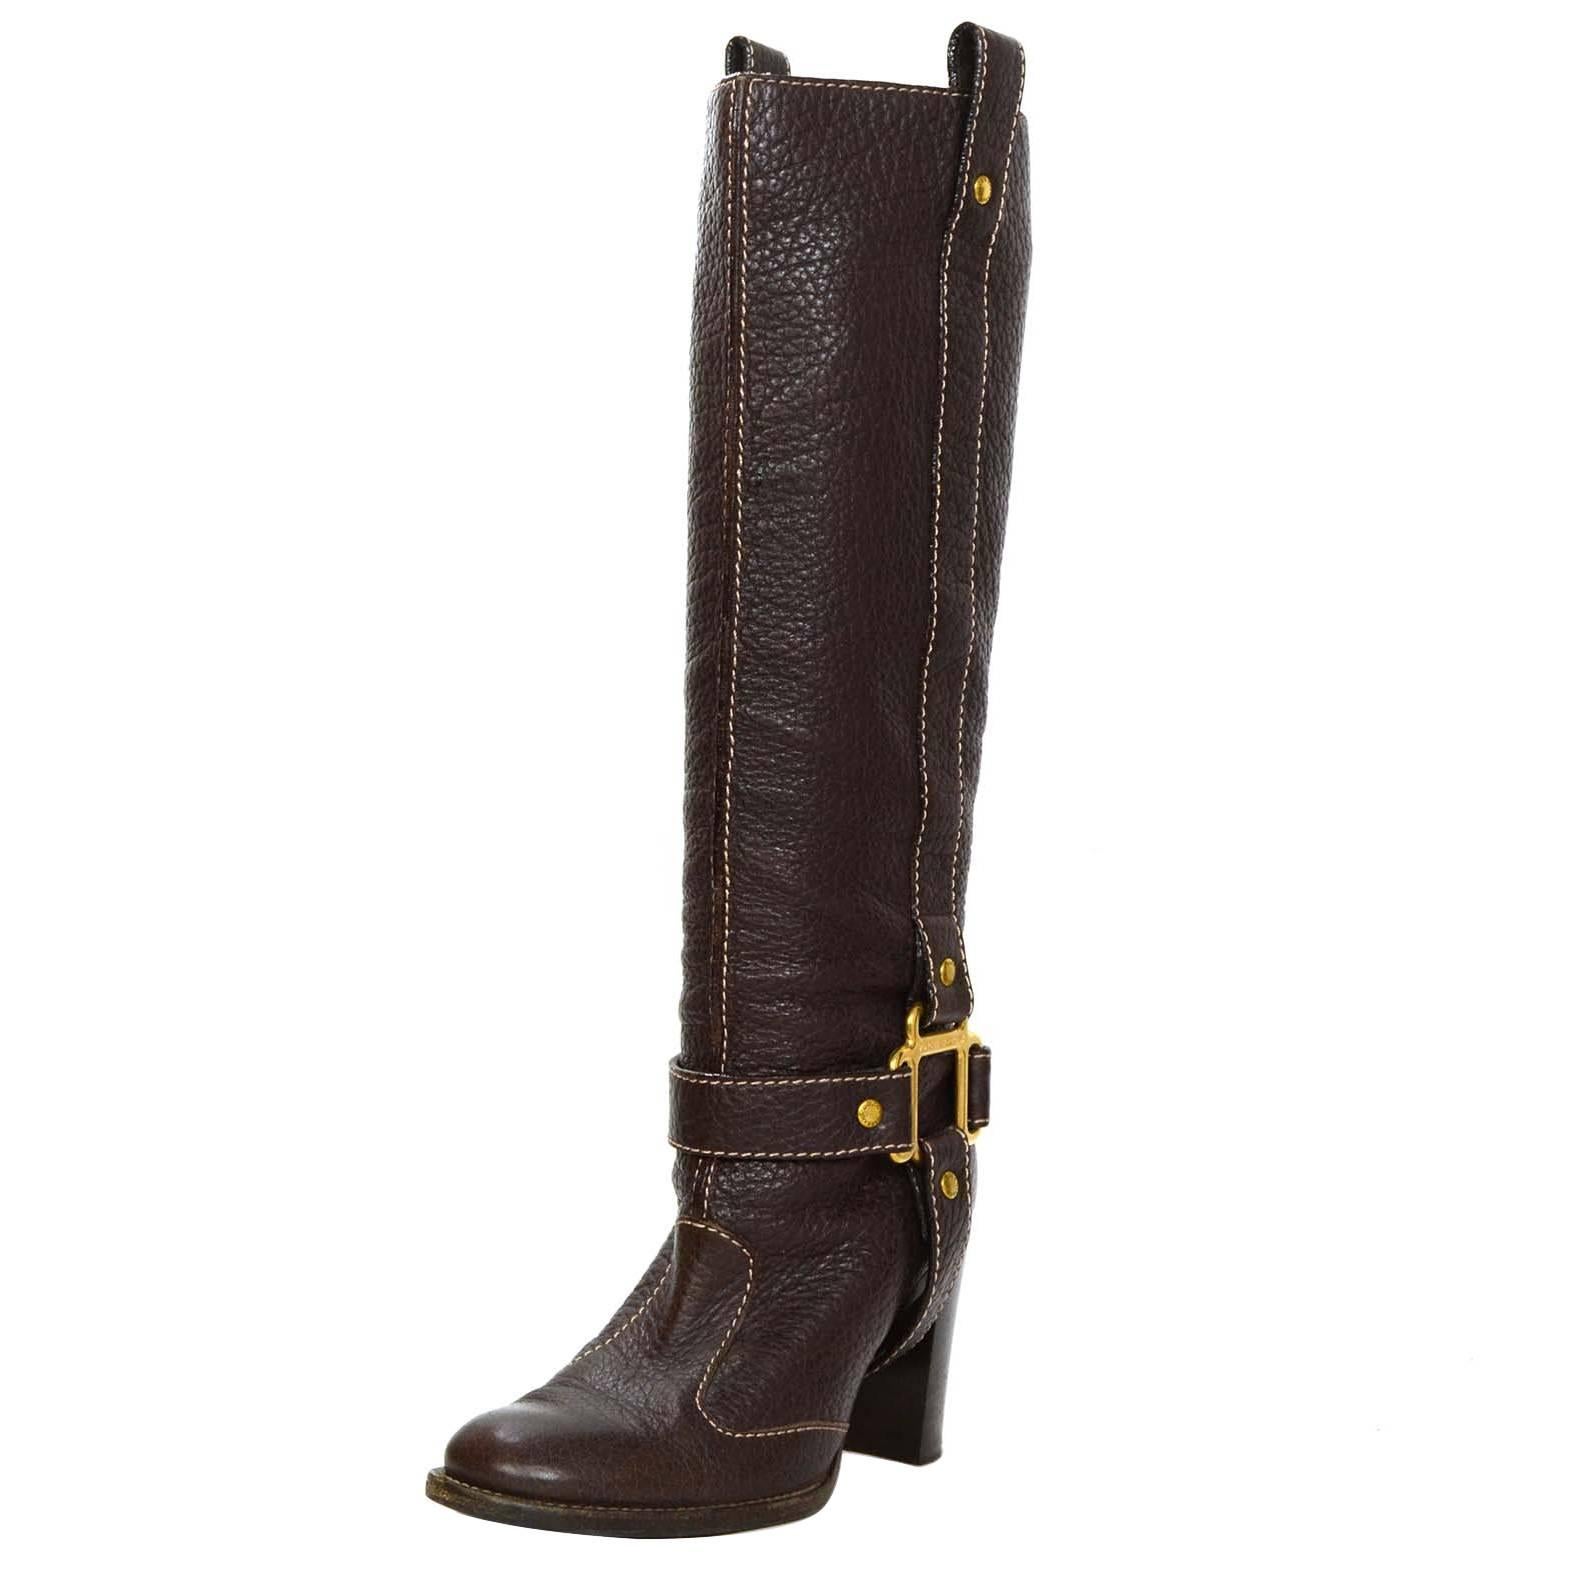 Dolce & Gabbana Brown Leather Tall Boots 
Features beige contrast stitching
Made In: Italy
Color: Brown
Materials: Leather
Closure/Opening: Pull on
Sole Stamp: Dolce & Gabbana Vero Cuoio Made in Italy 35
Overall Condition: Excellent pre-owned